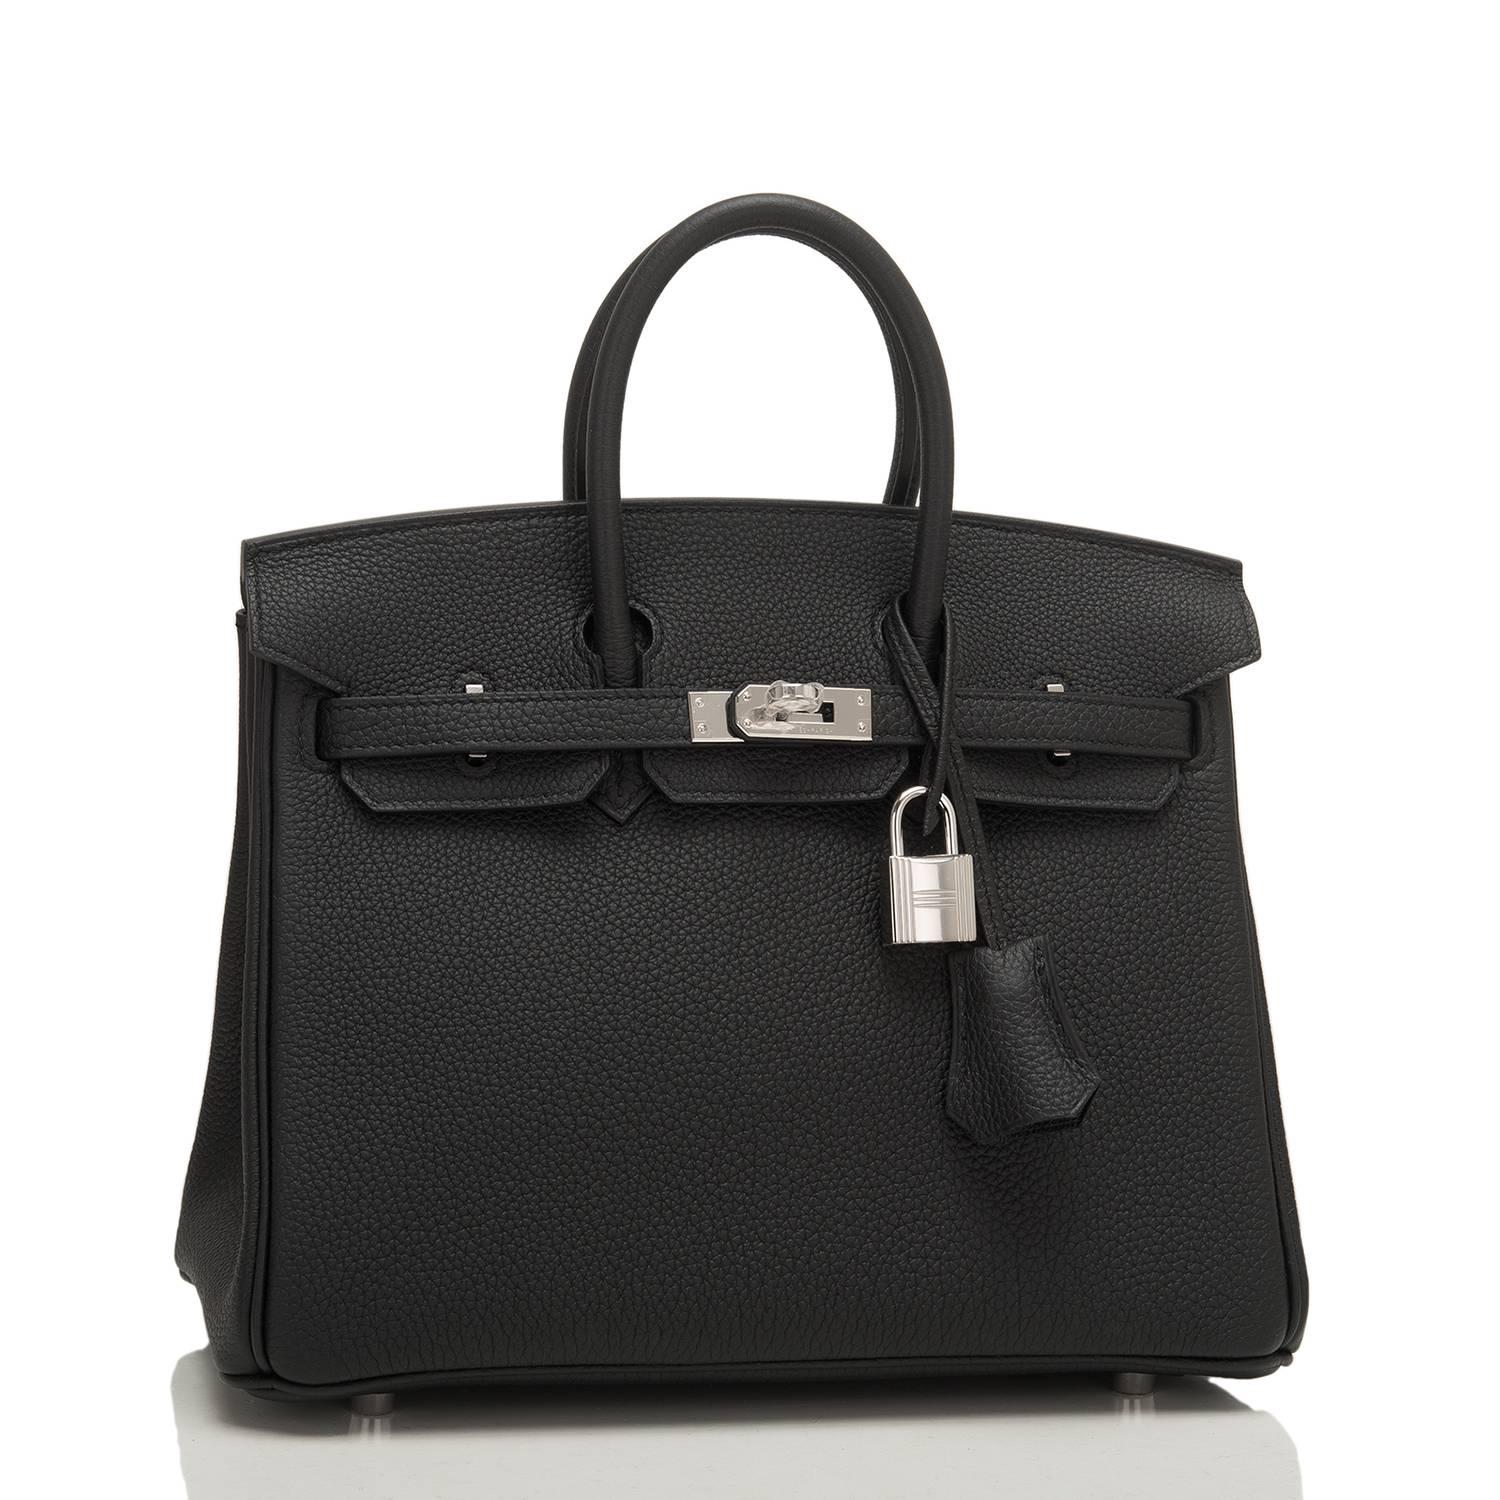 Hermes Black Birkin 25cm of togo leather with palladium hardware.

This Birkin has tonal stitching, a front toggle closure, a clochette with lock and two keys, and double rolled handles.

The interior is lined with black chevre and has a zip pocket